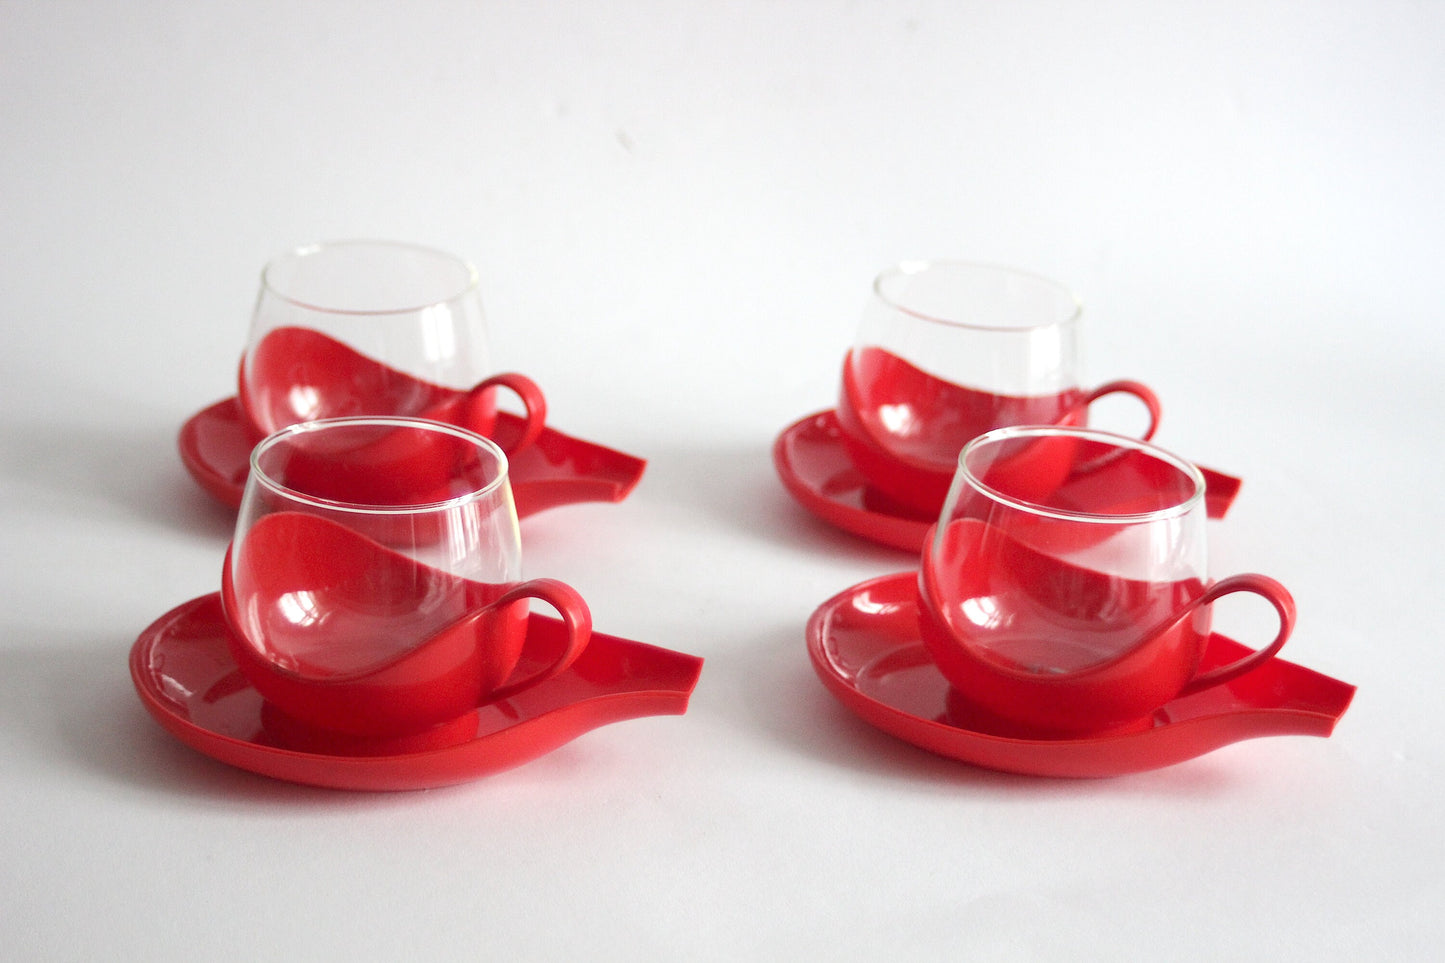 MELITTA GERMANY Set of 4 red glass tumblers with small plates for tea or coffee with plastic handles - 60s / 70s